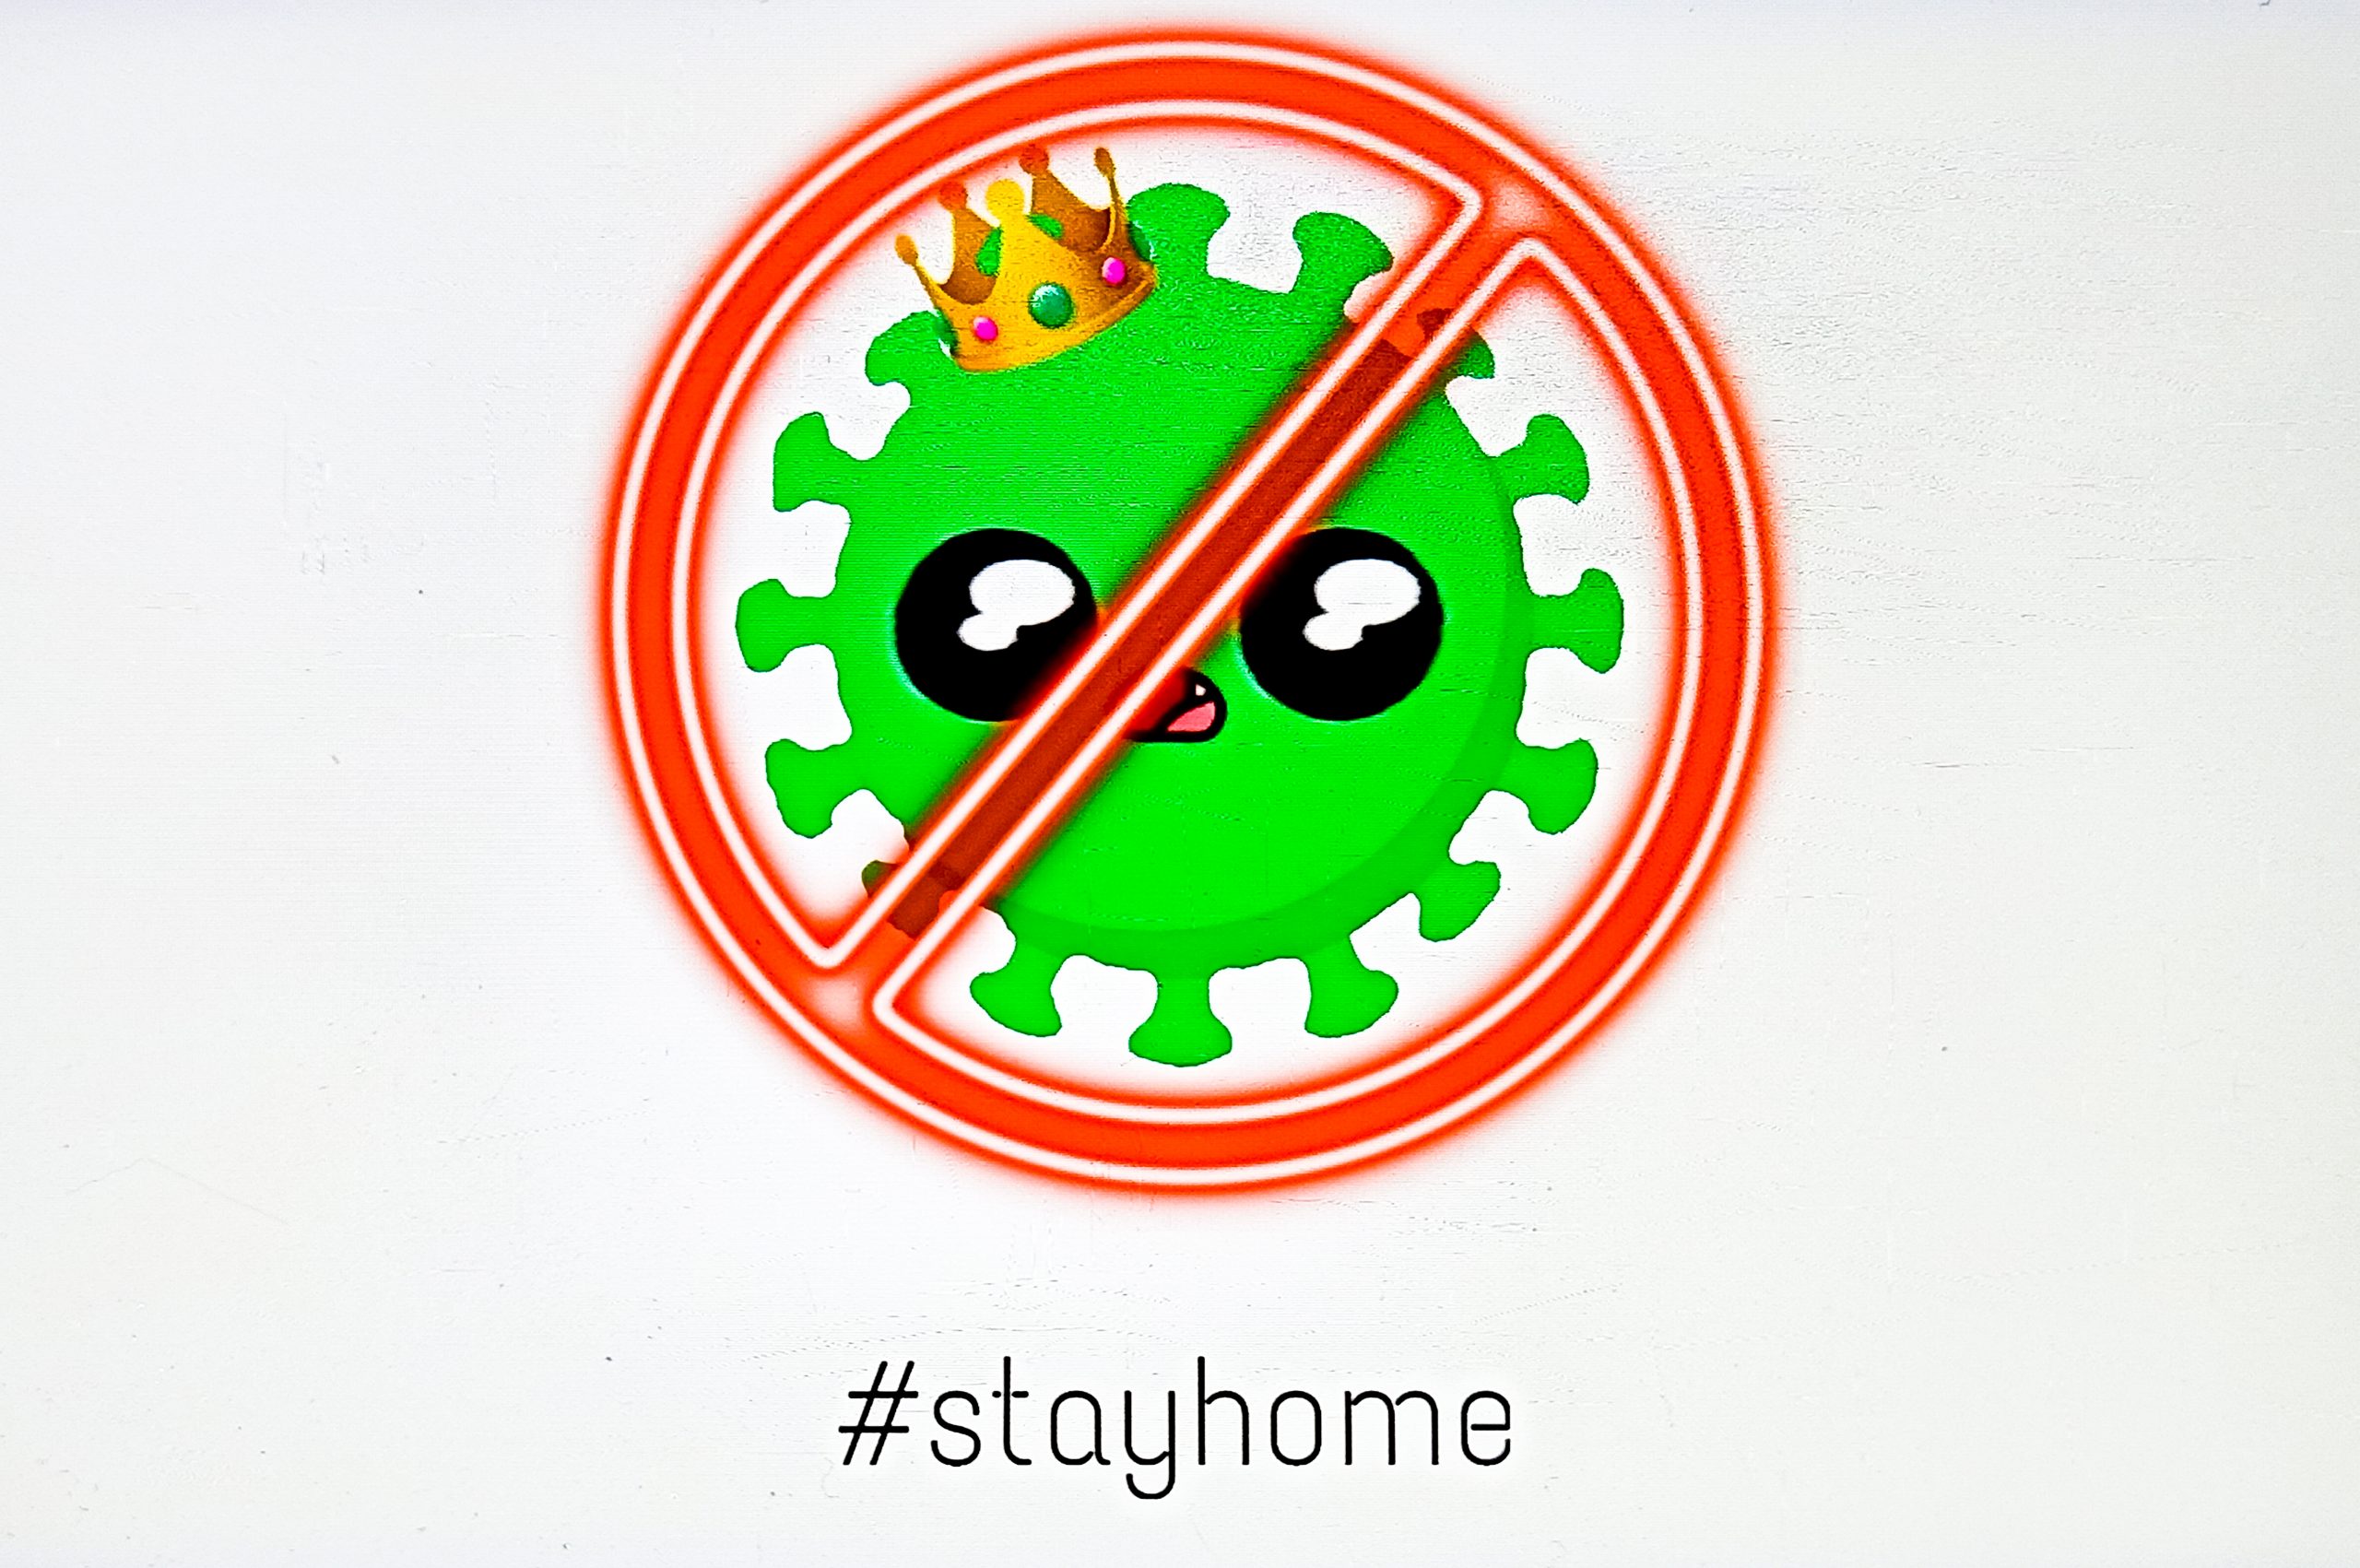 Stay home illustration